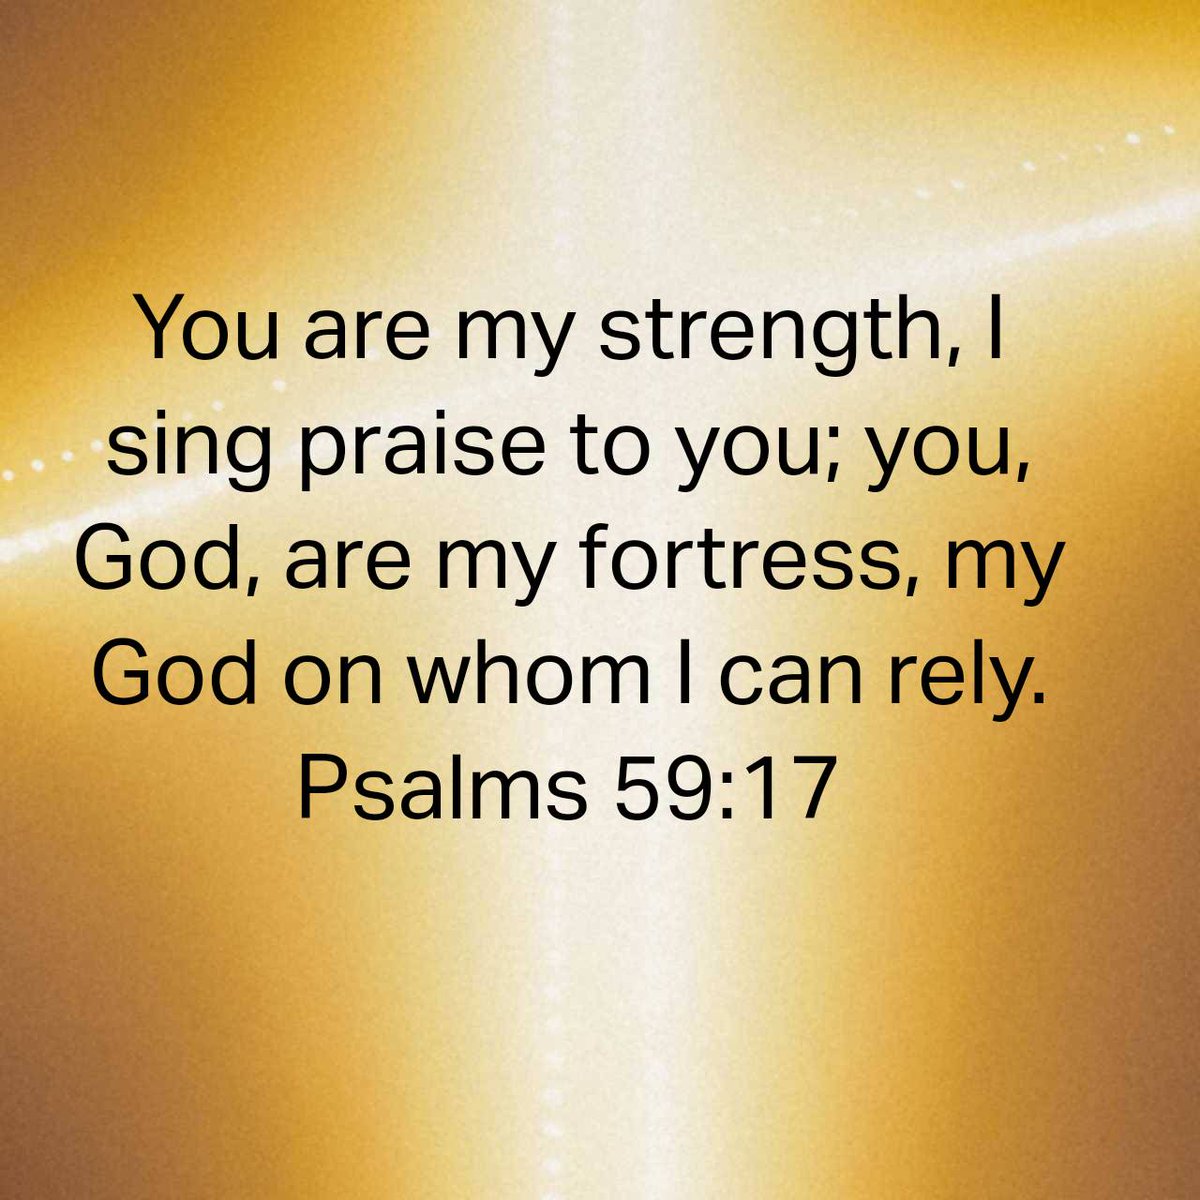 He...is our STRENGTH and Fortress!